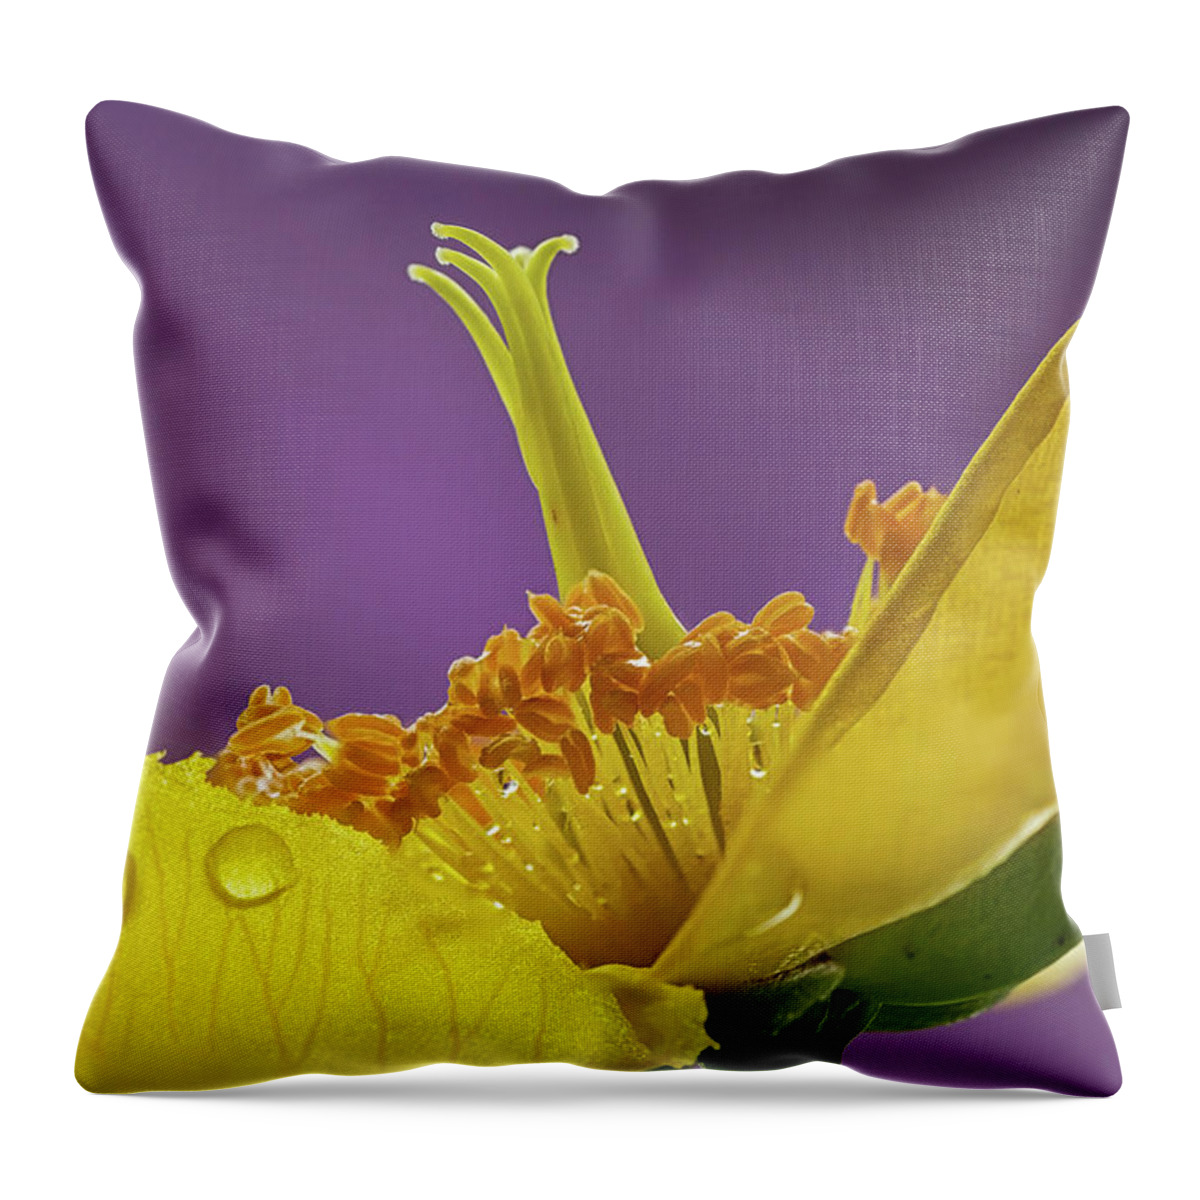 Wort Throw Pillow featuring the photograph St Johns Wort Flower by Shirley Mitchell